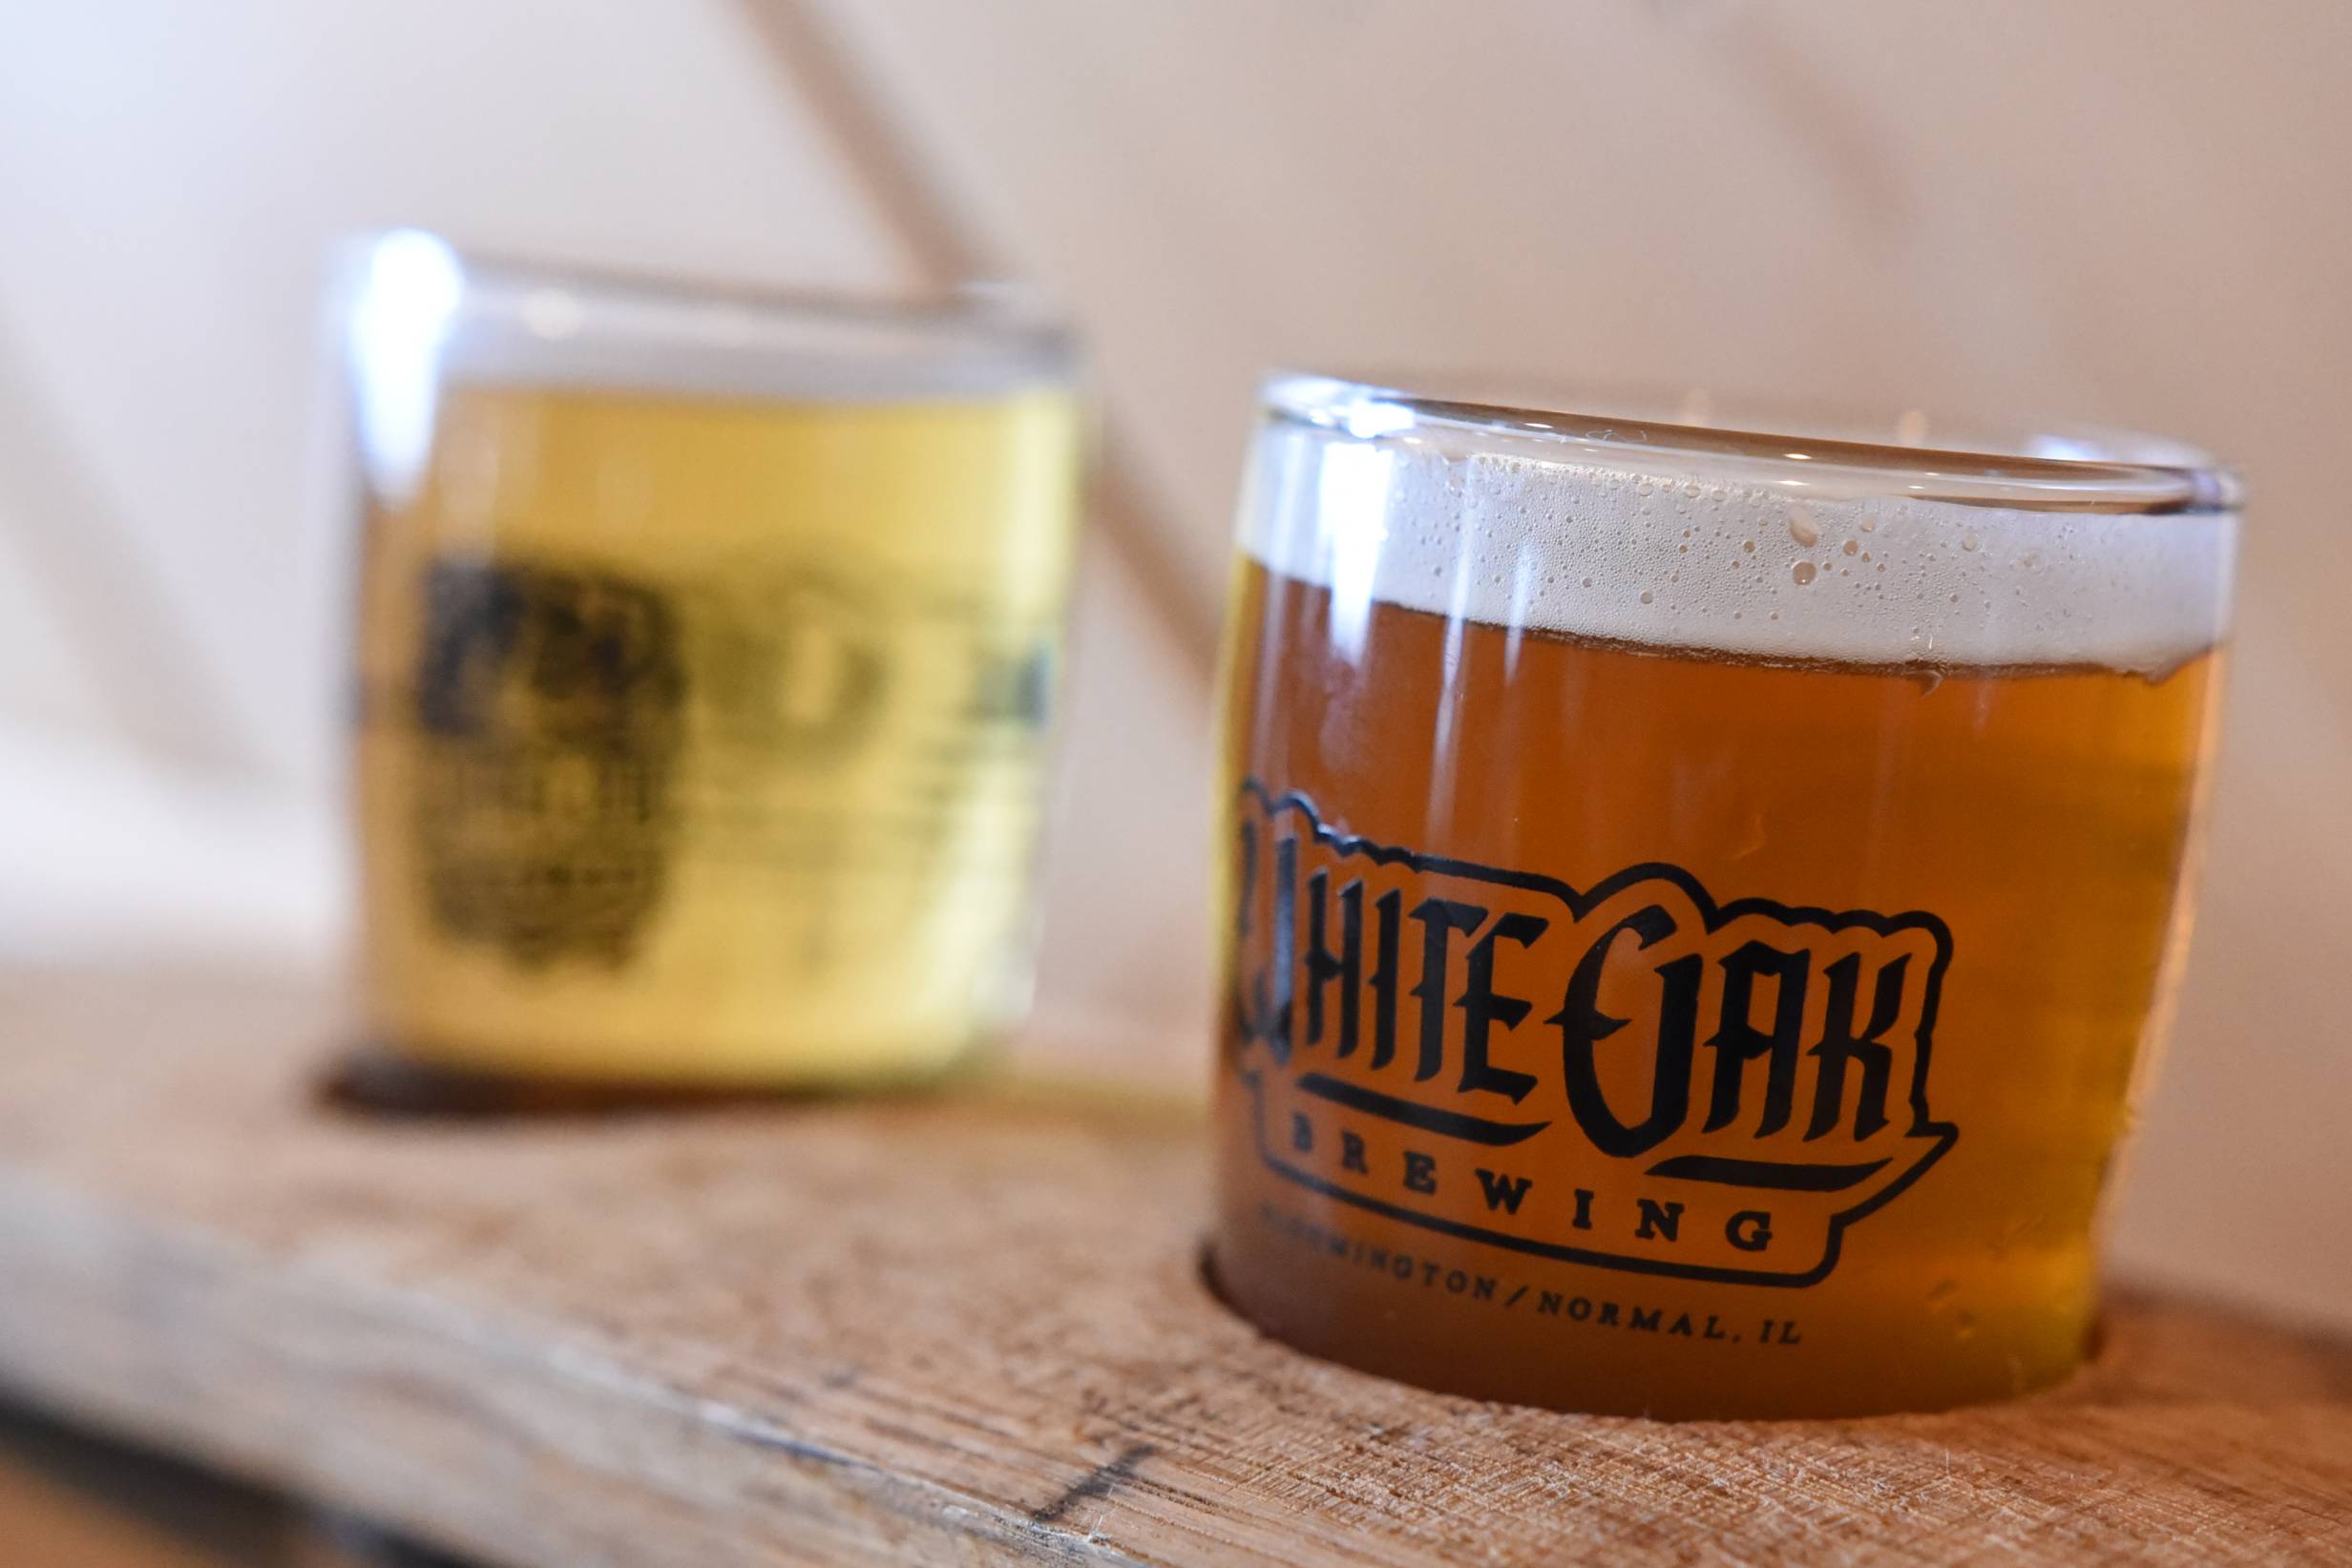 A close up image of White Oak Breweryâ€™s sour saison beer with the White Oak Cream ale in the background. Photo by Jordan Goebig.